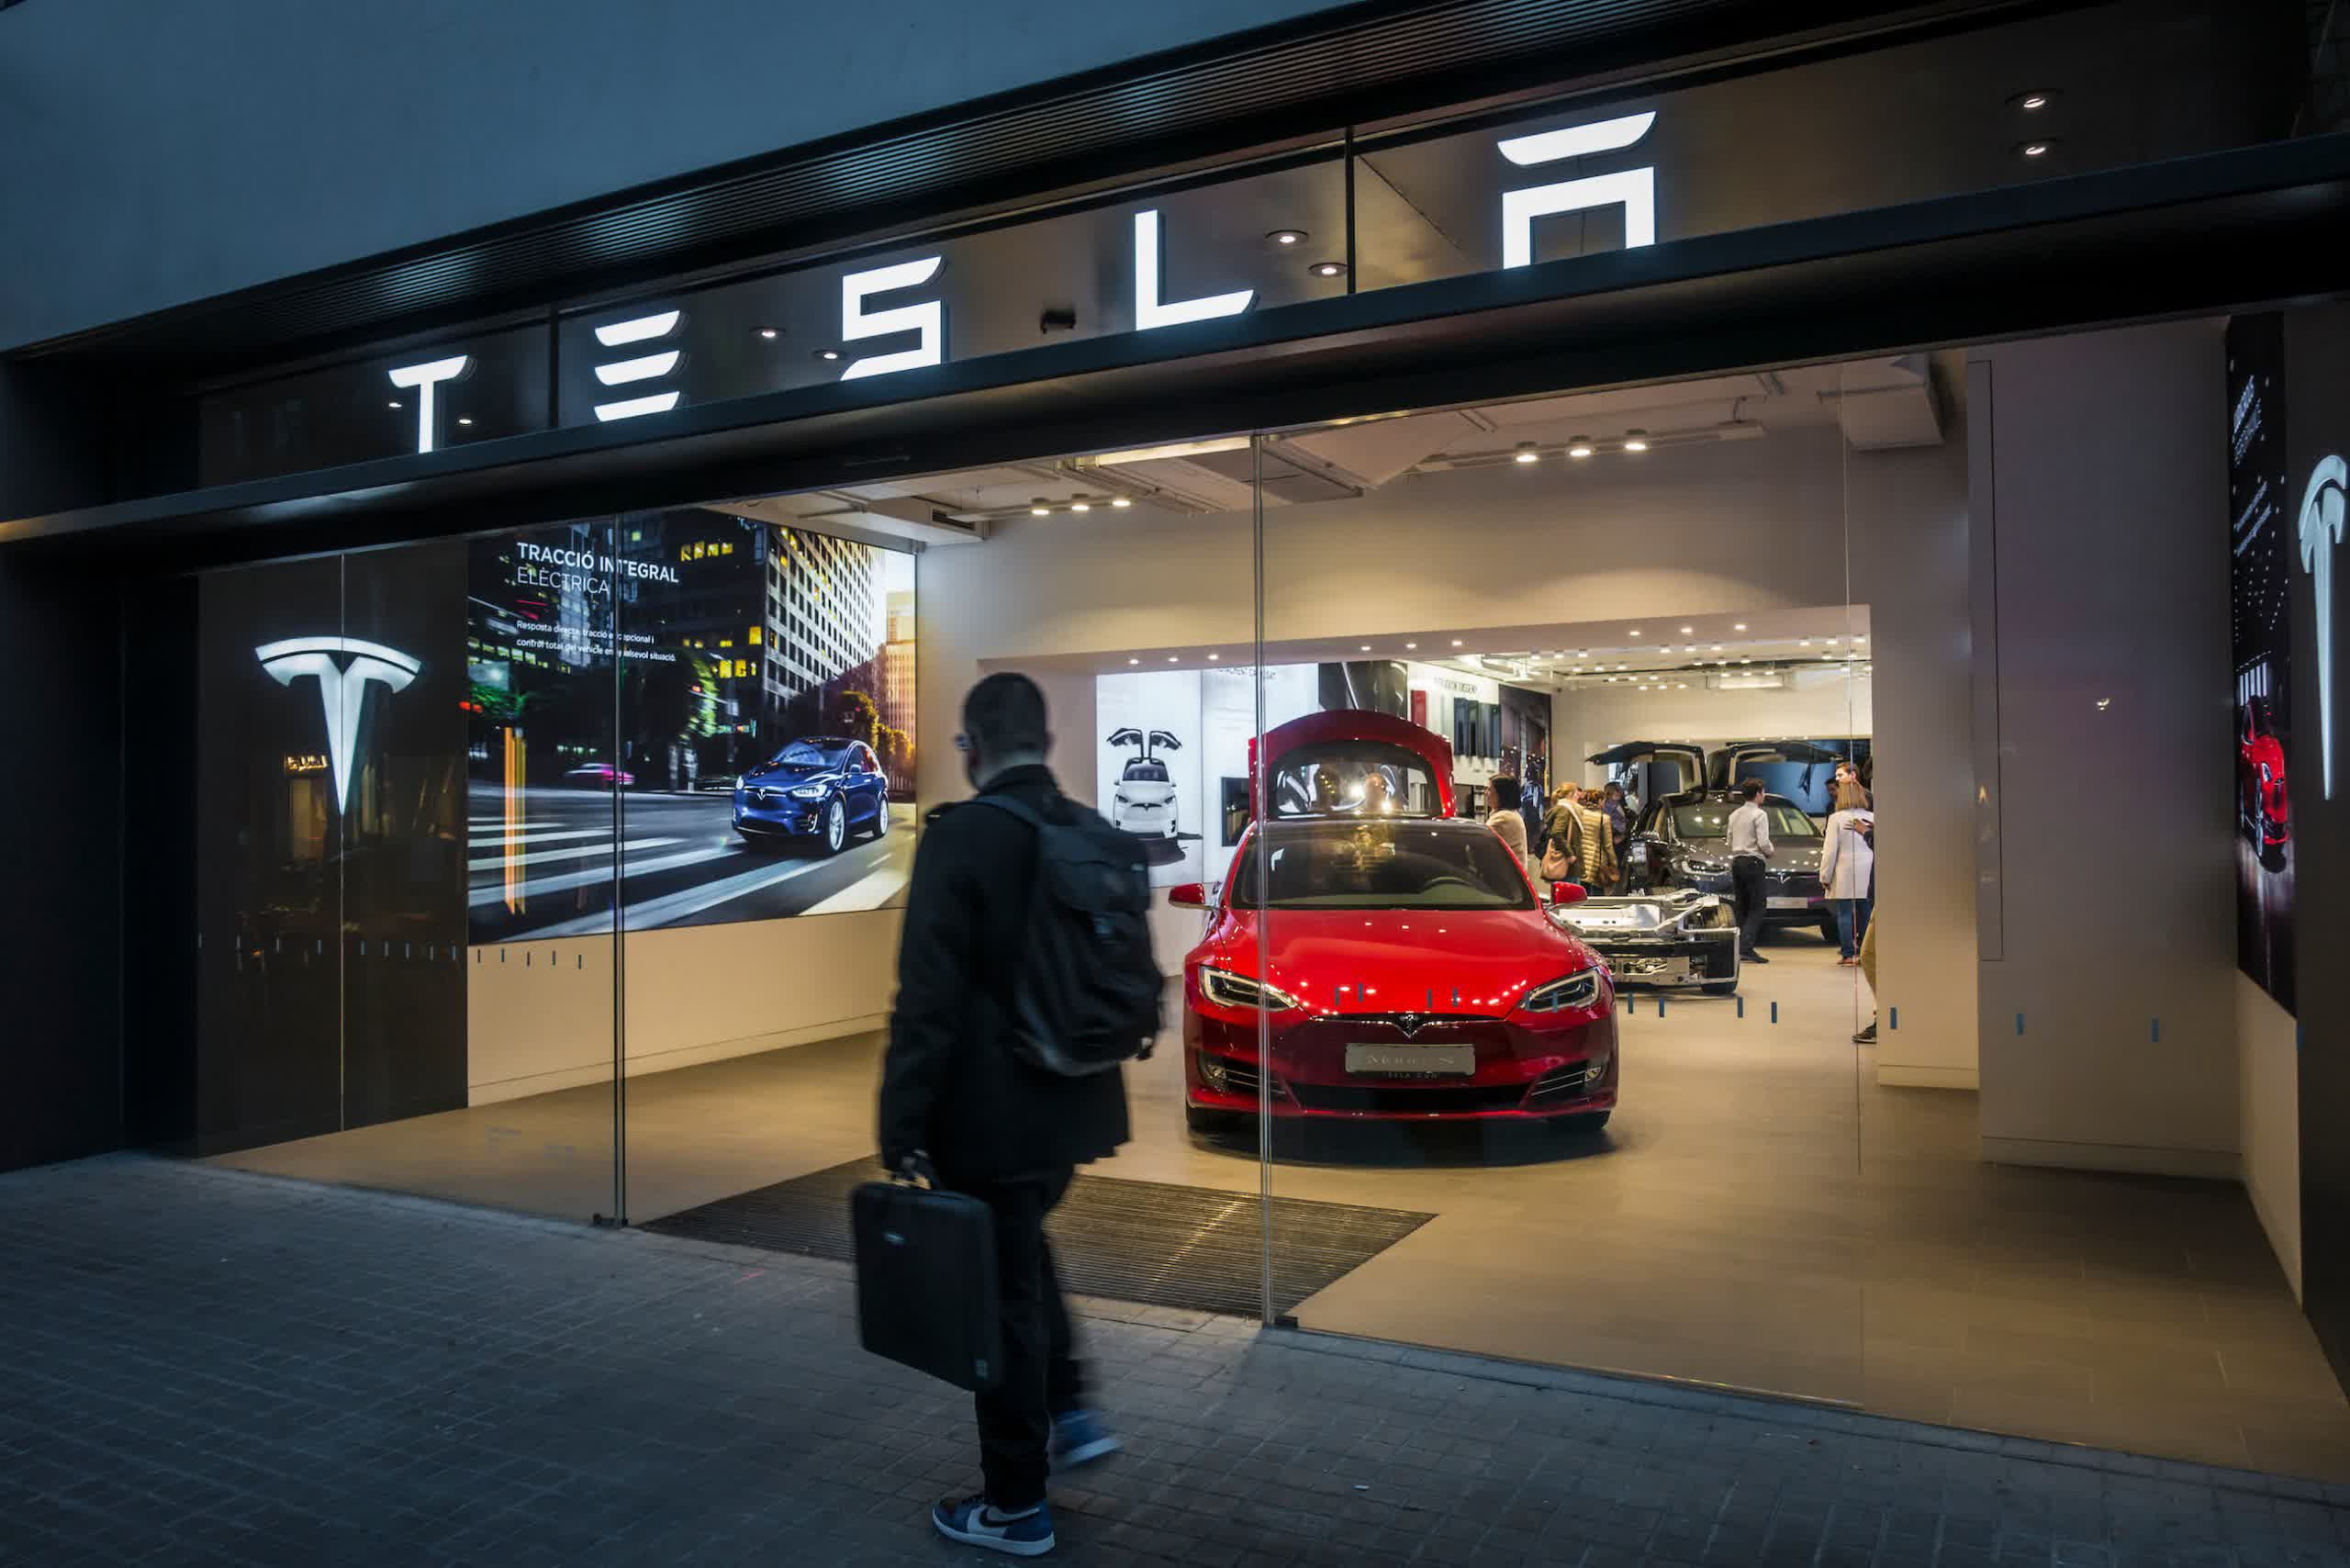 Tesla sets Q1 earnings record with $438 million in net income, vehicle deliveries up 100 percent